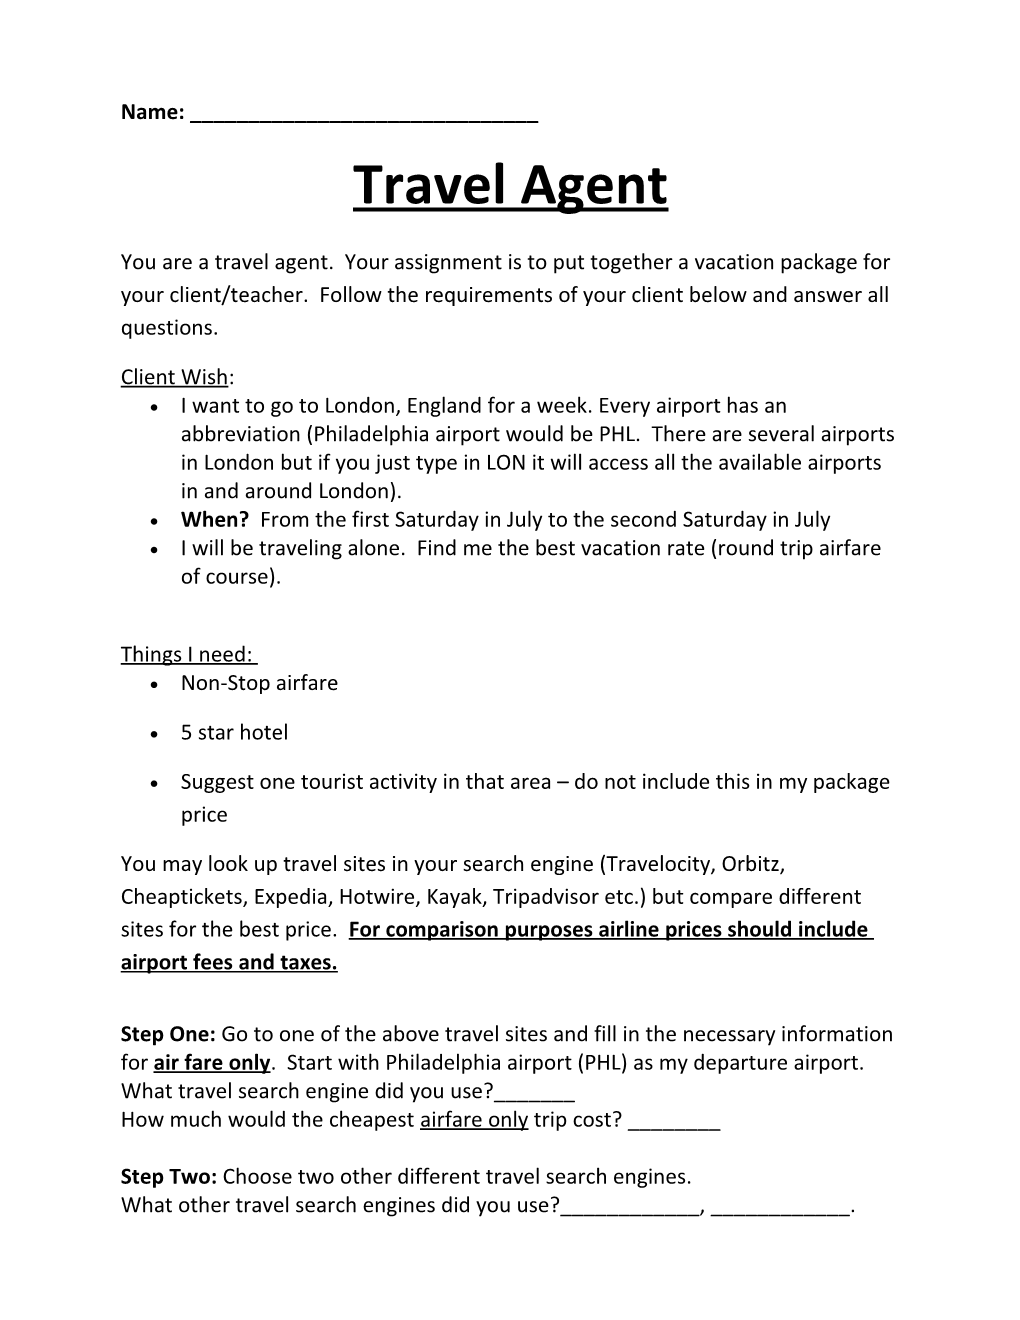 You Are a Travel Agent. Your Assignment Is to Put Together a Vacation Package for Your